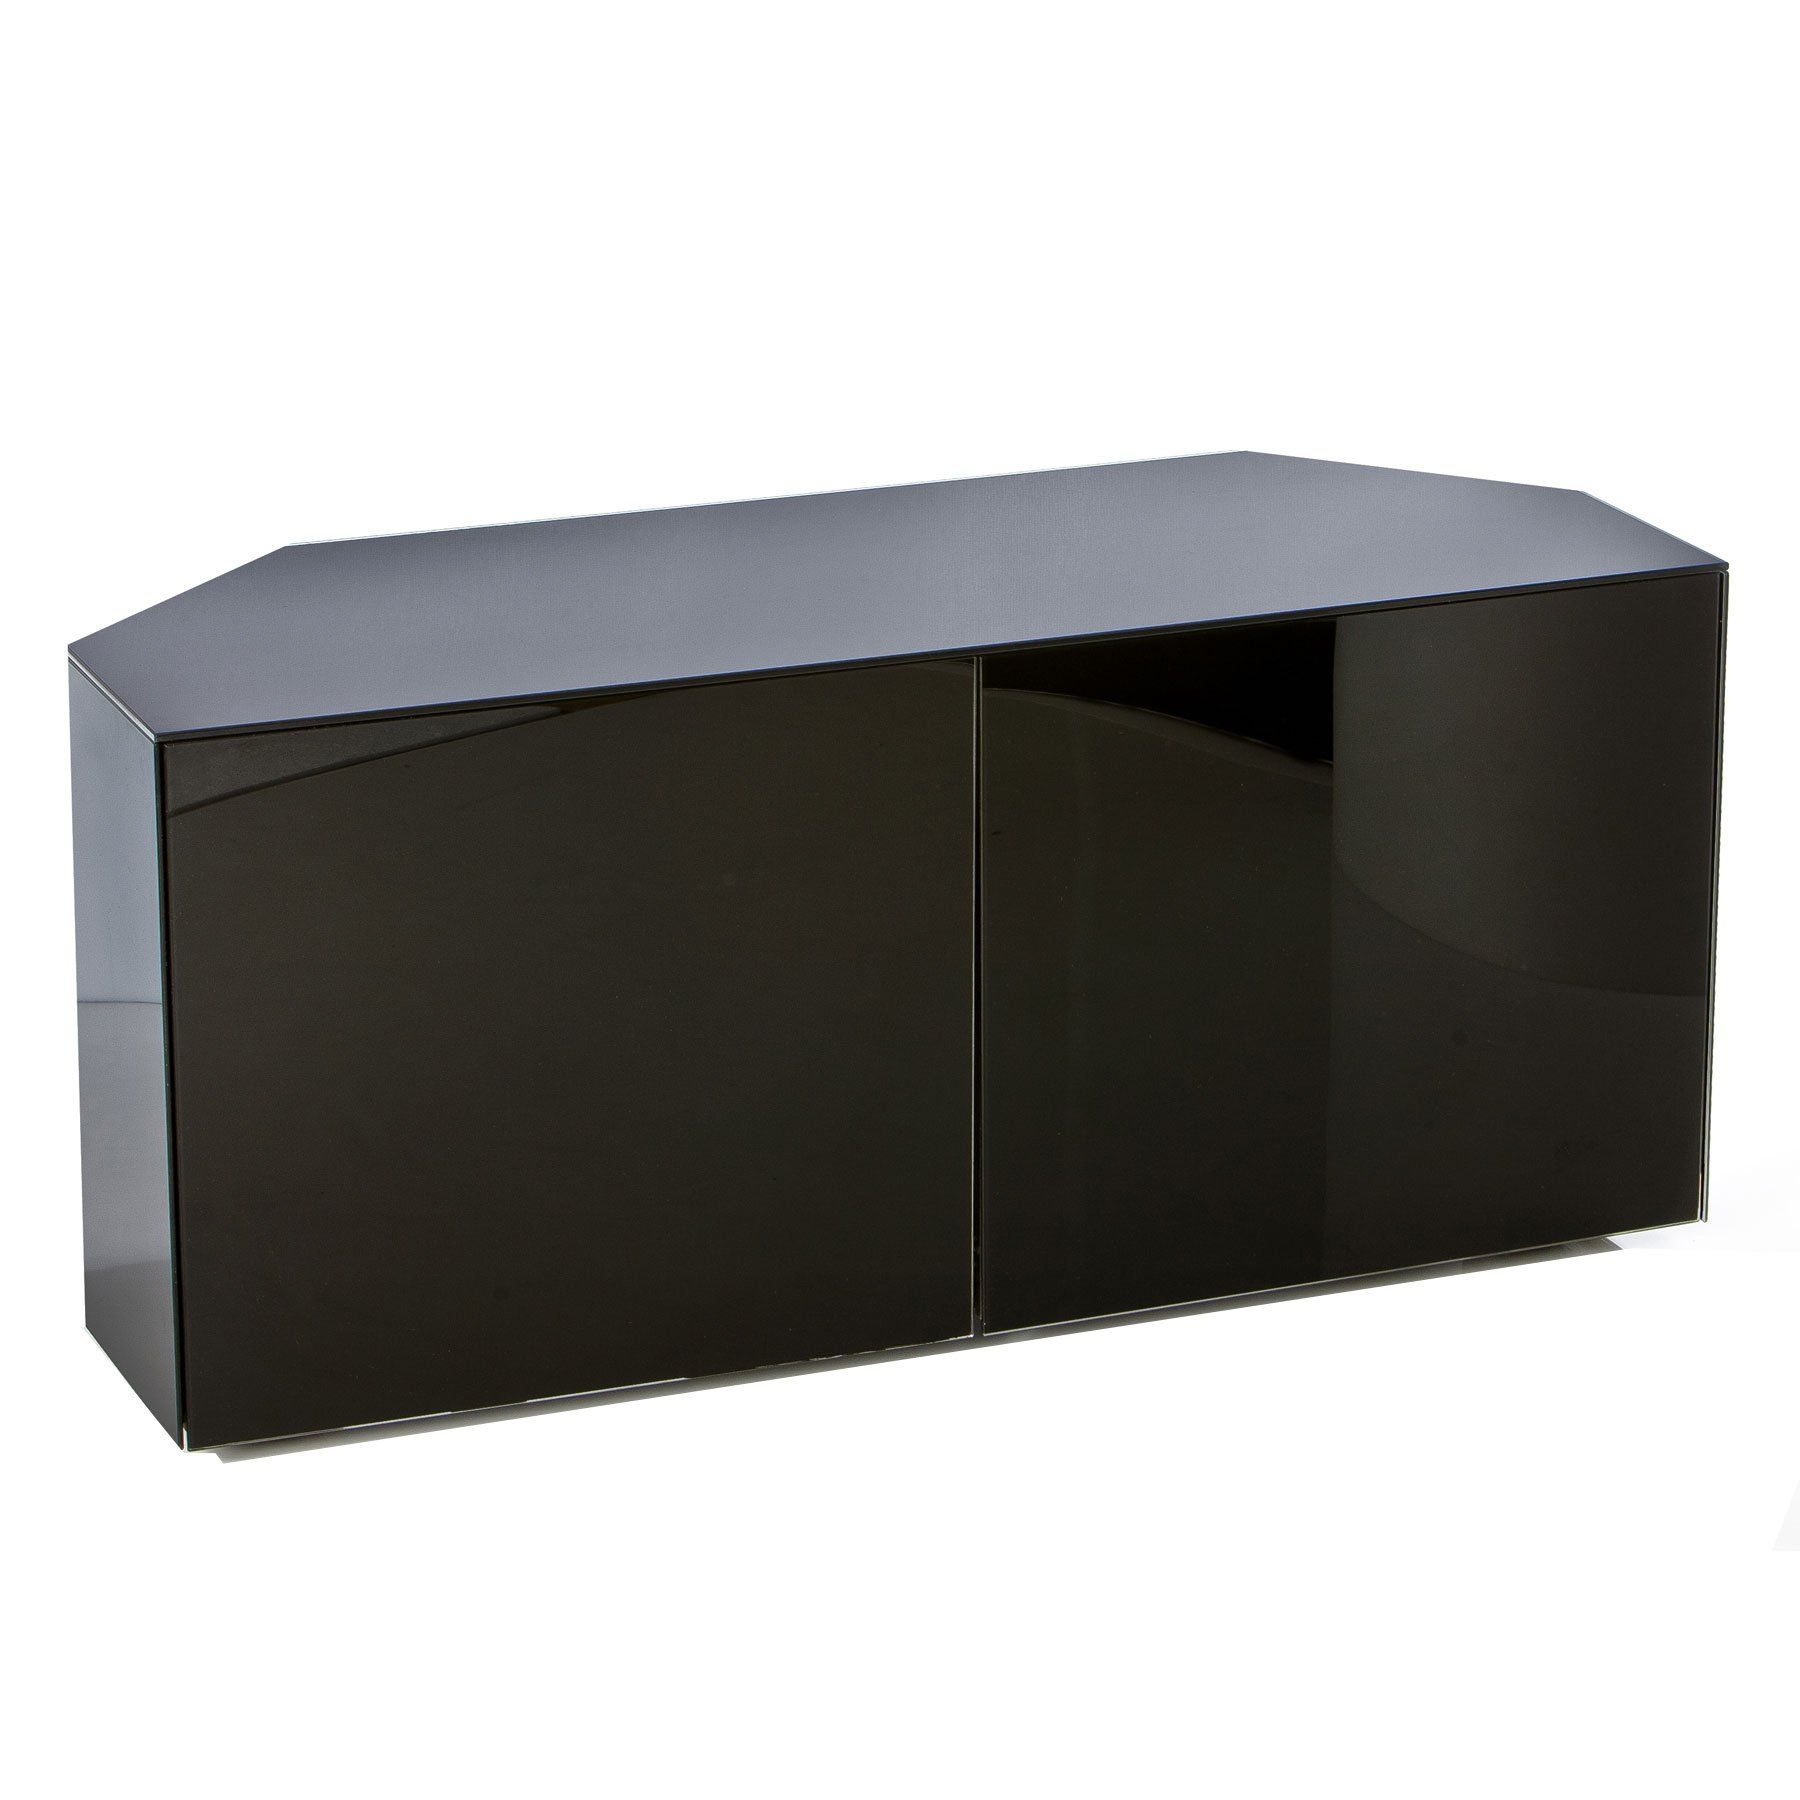 Invictus Black High Gloss Corner Tv Stand For Up To 55" Tvs Intended For Tv Cabinets Black High Gloss (View 4 of 15)